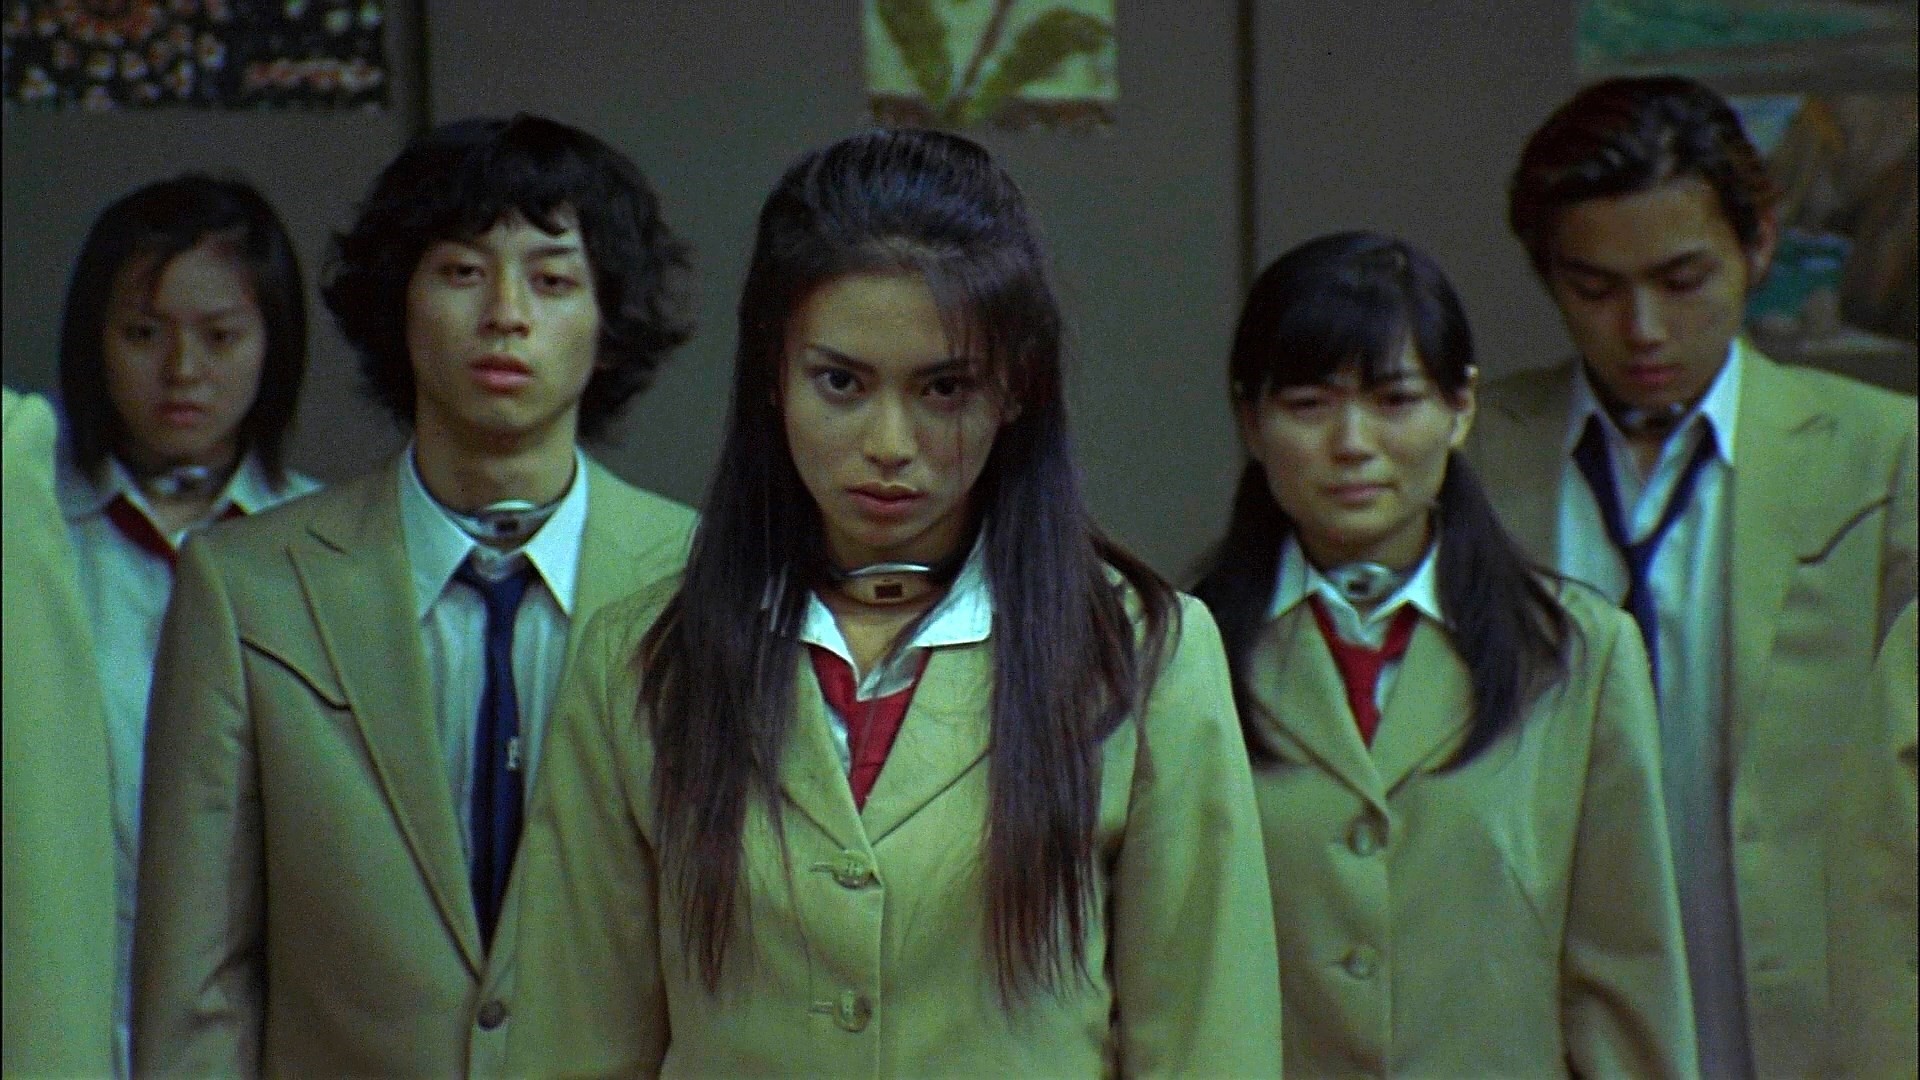 Asian Schoolgirl Bus - How Japan's 90s teen delinquency crisis inspired a wave of killer movies |  Dazed